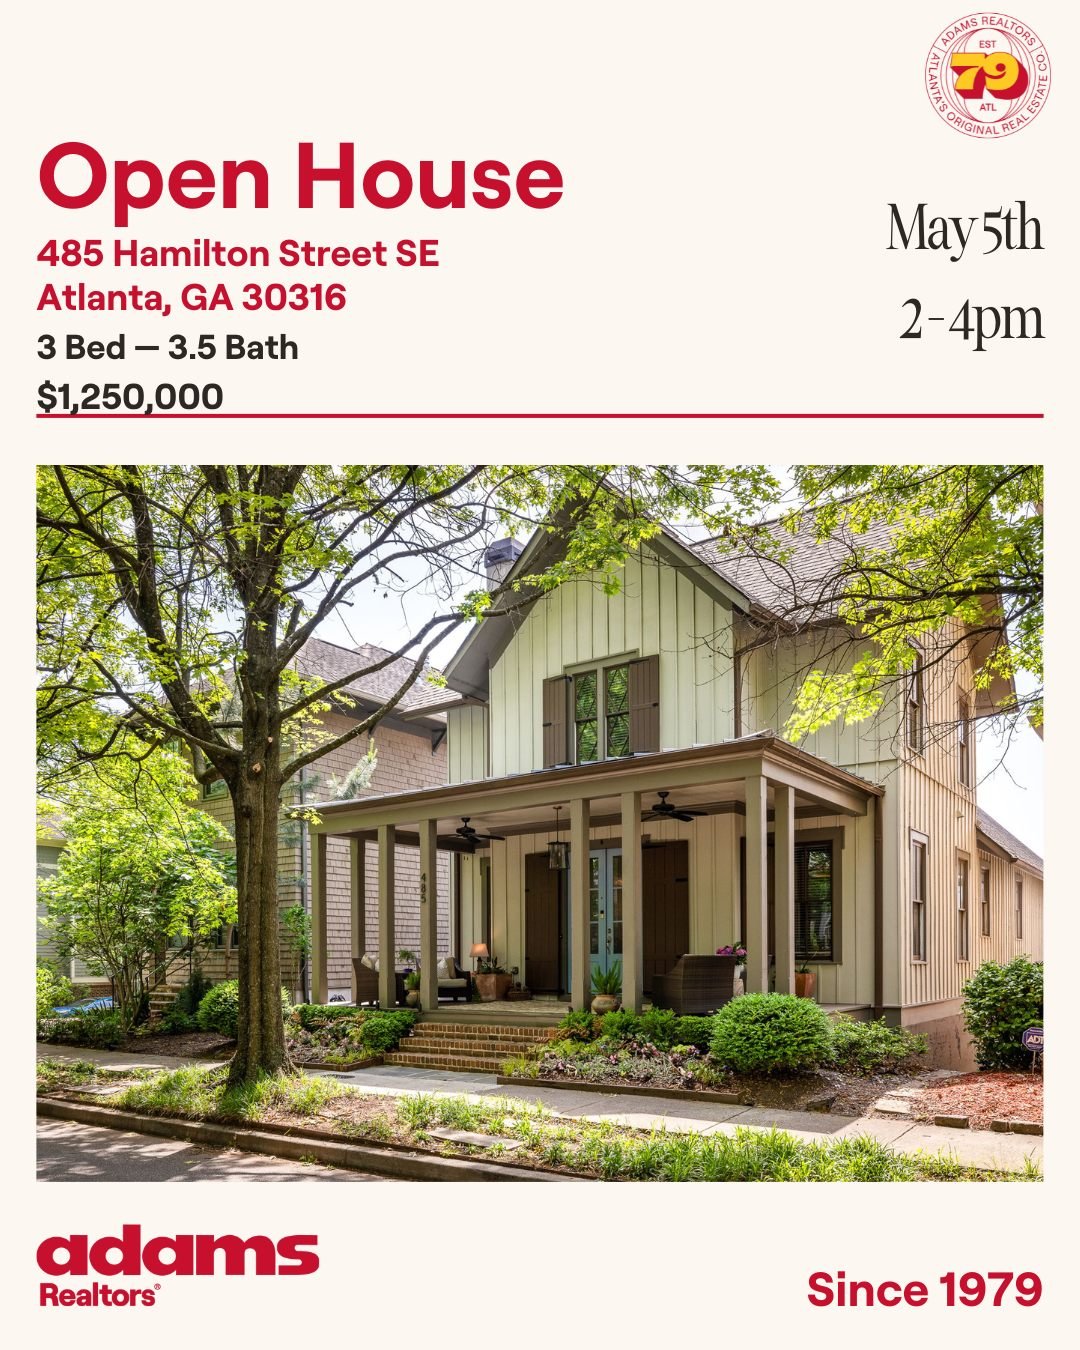 Open House Sunday, May 5th from 2-4pm in Glenwood Park! 485 Hamilton St 3 BR | 3.5 BA $1,250,000

Located near the Atlanta Beltline, this lovely Earthcraft home in desirable Glenwood Park has hardwood floors throughout and many sophisticated upgrades